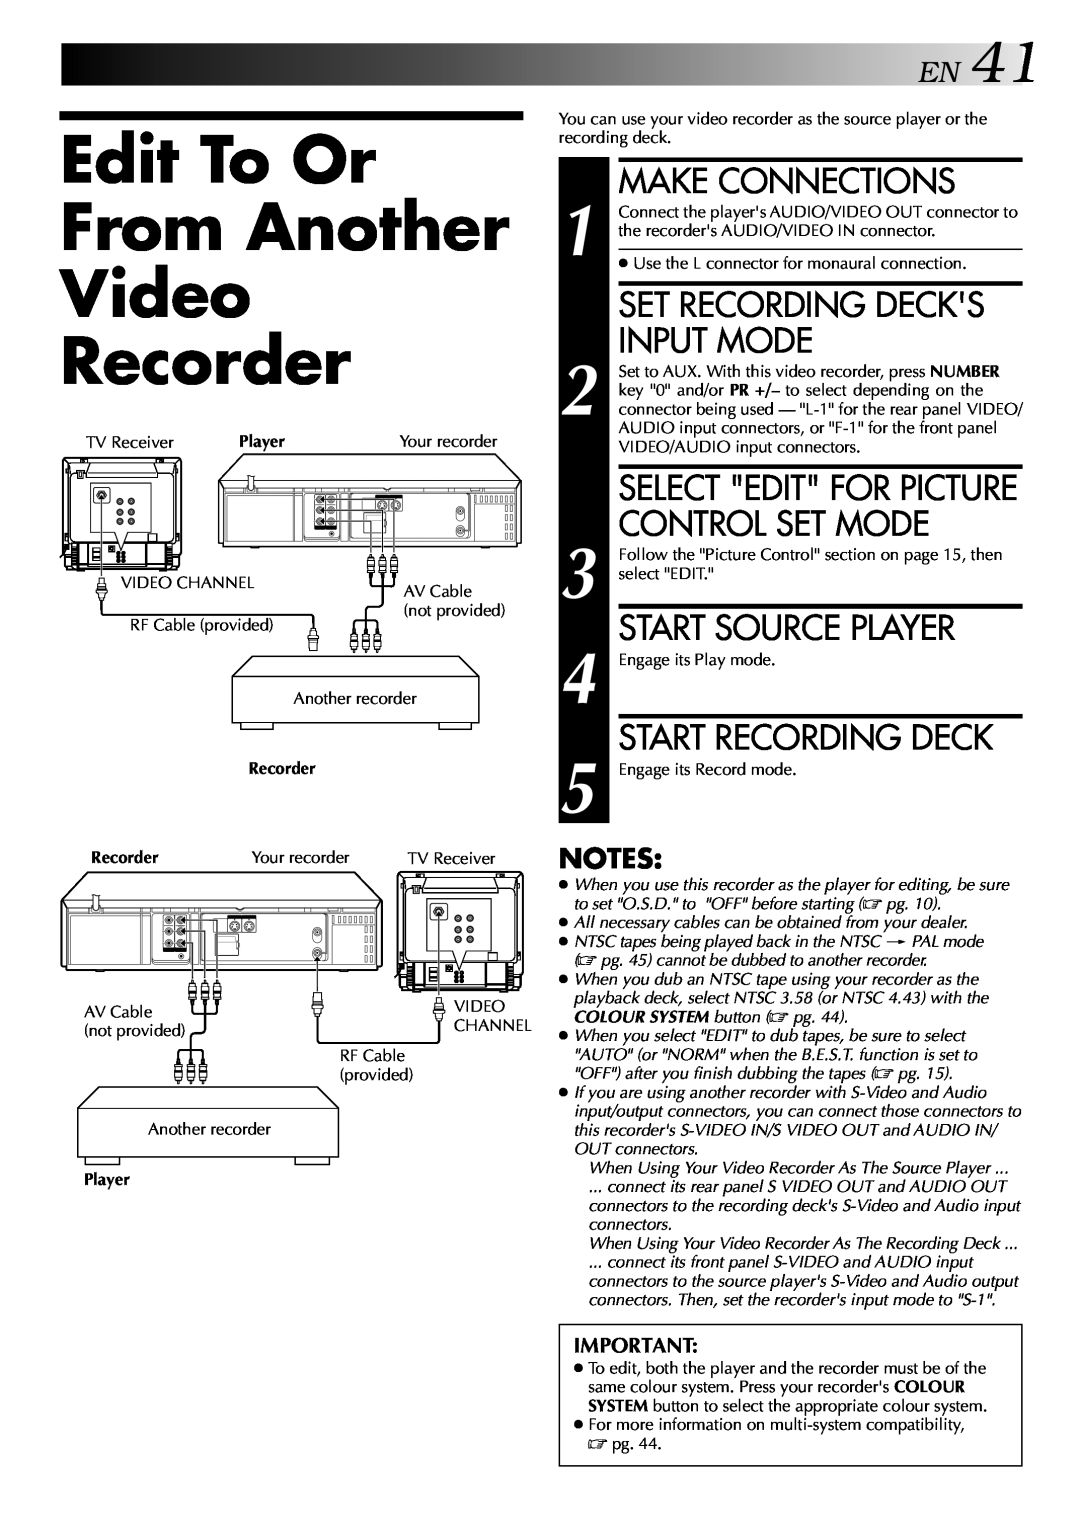 JVC LPT0428-001A Edit To Or From Another Video Recorder, EN41, Set Recording Decks Input Mode, Start Source Player 